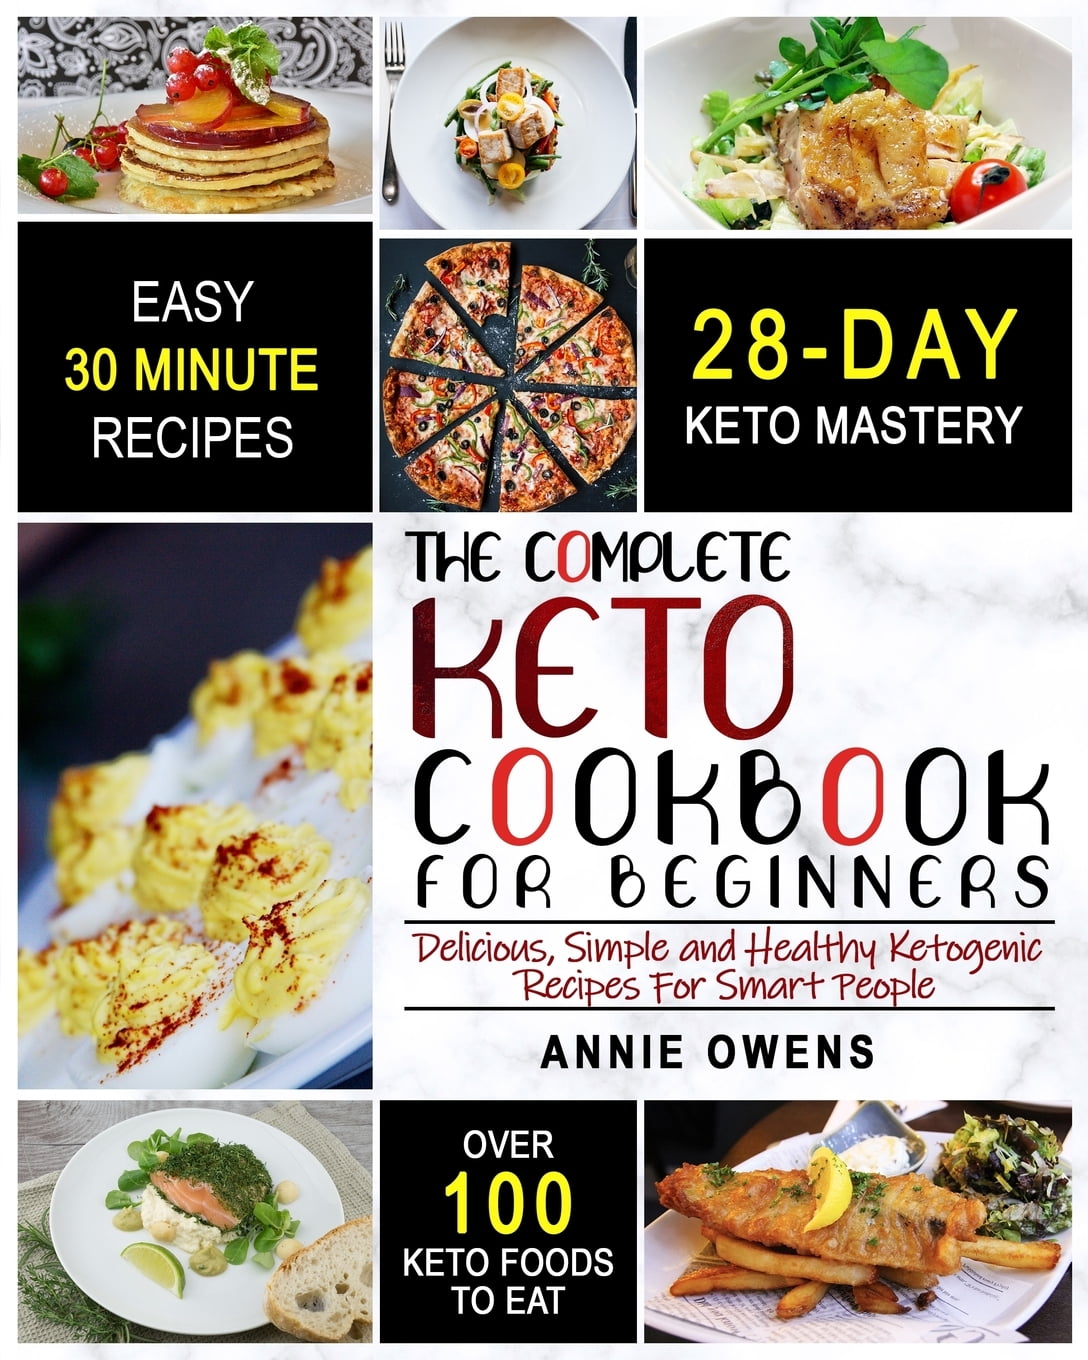 Keto Diet : The Complete Keto Cookbook For Beginners - Delicious